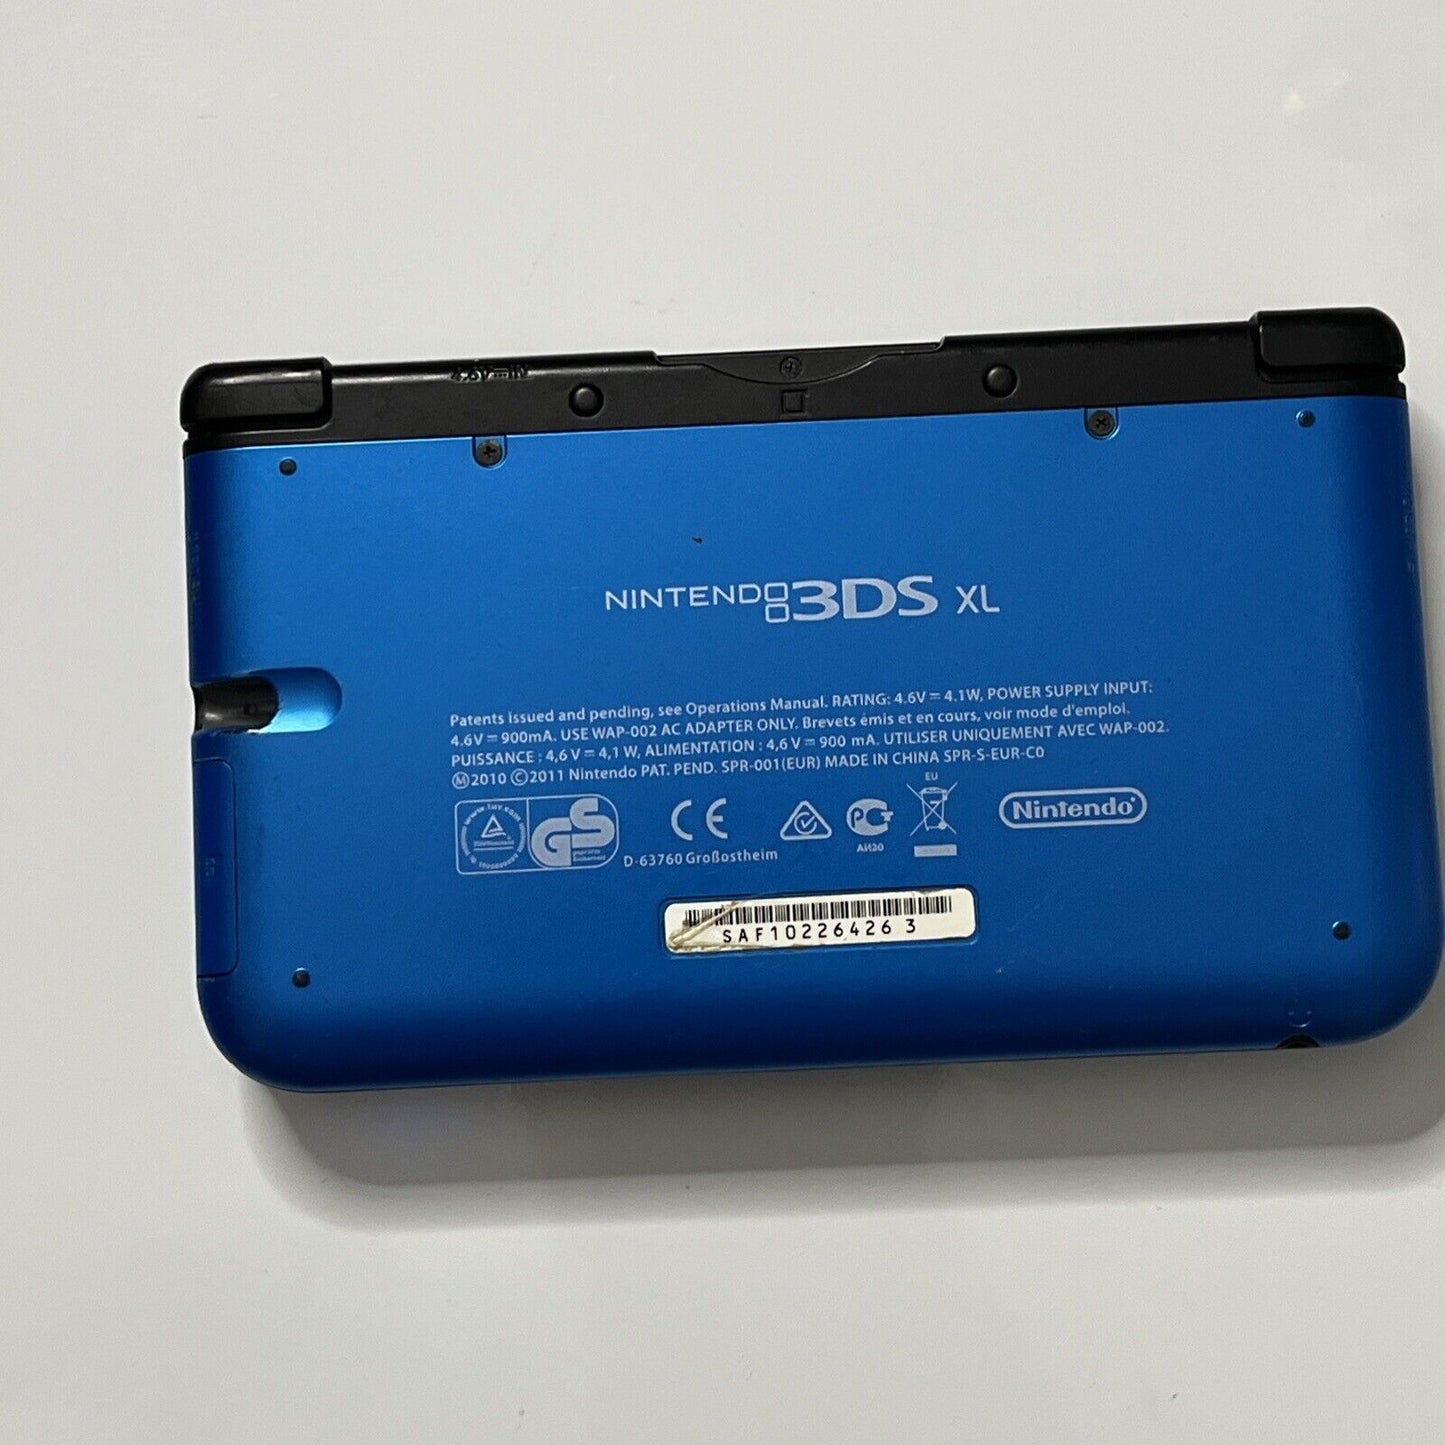 Nintendo 3DS XL 4GB Console Blue + Charger + Fire Emblem Fates Installed Game